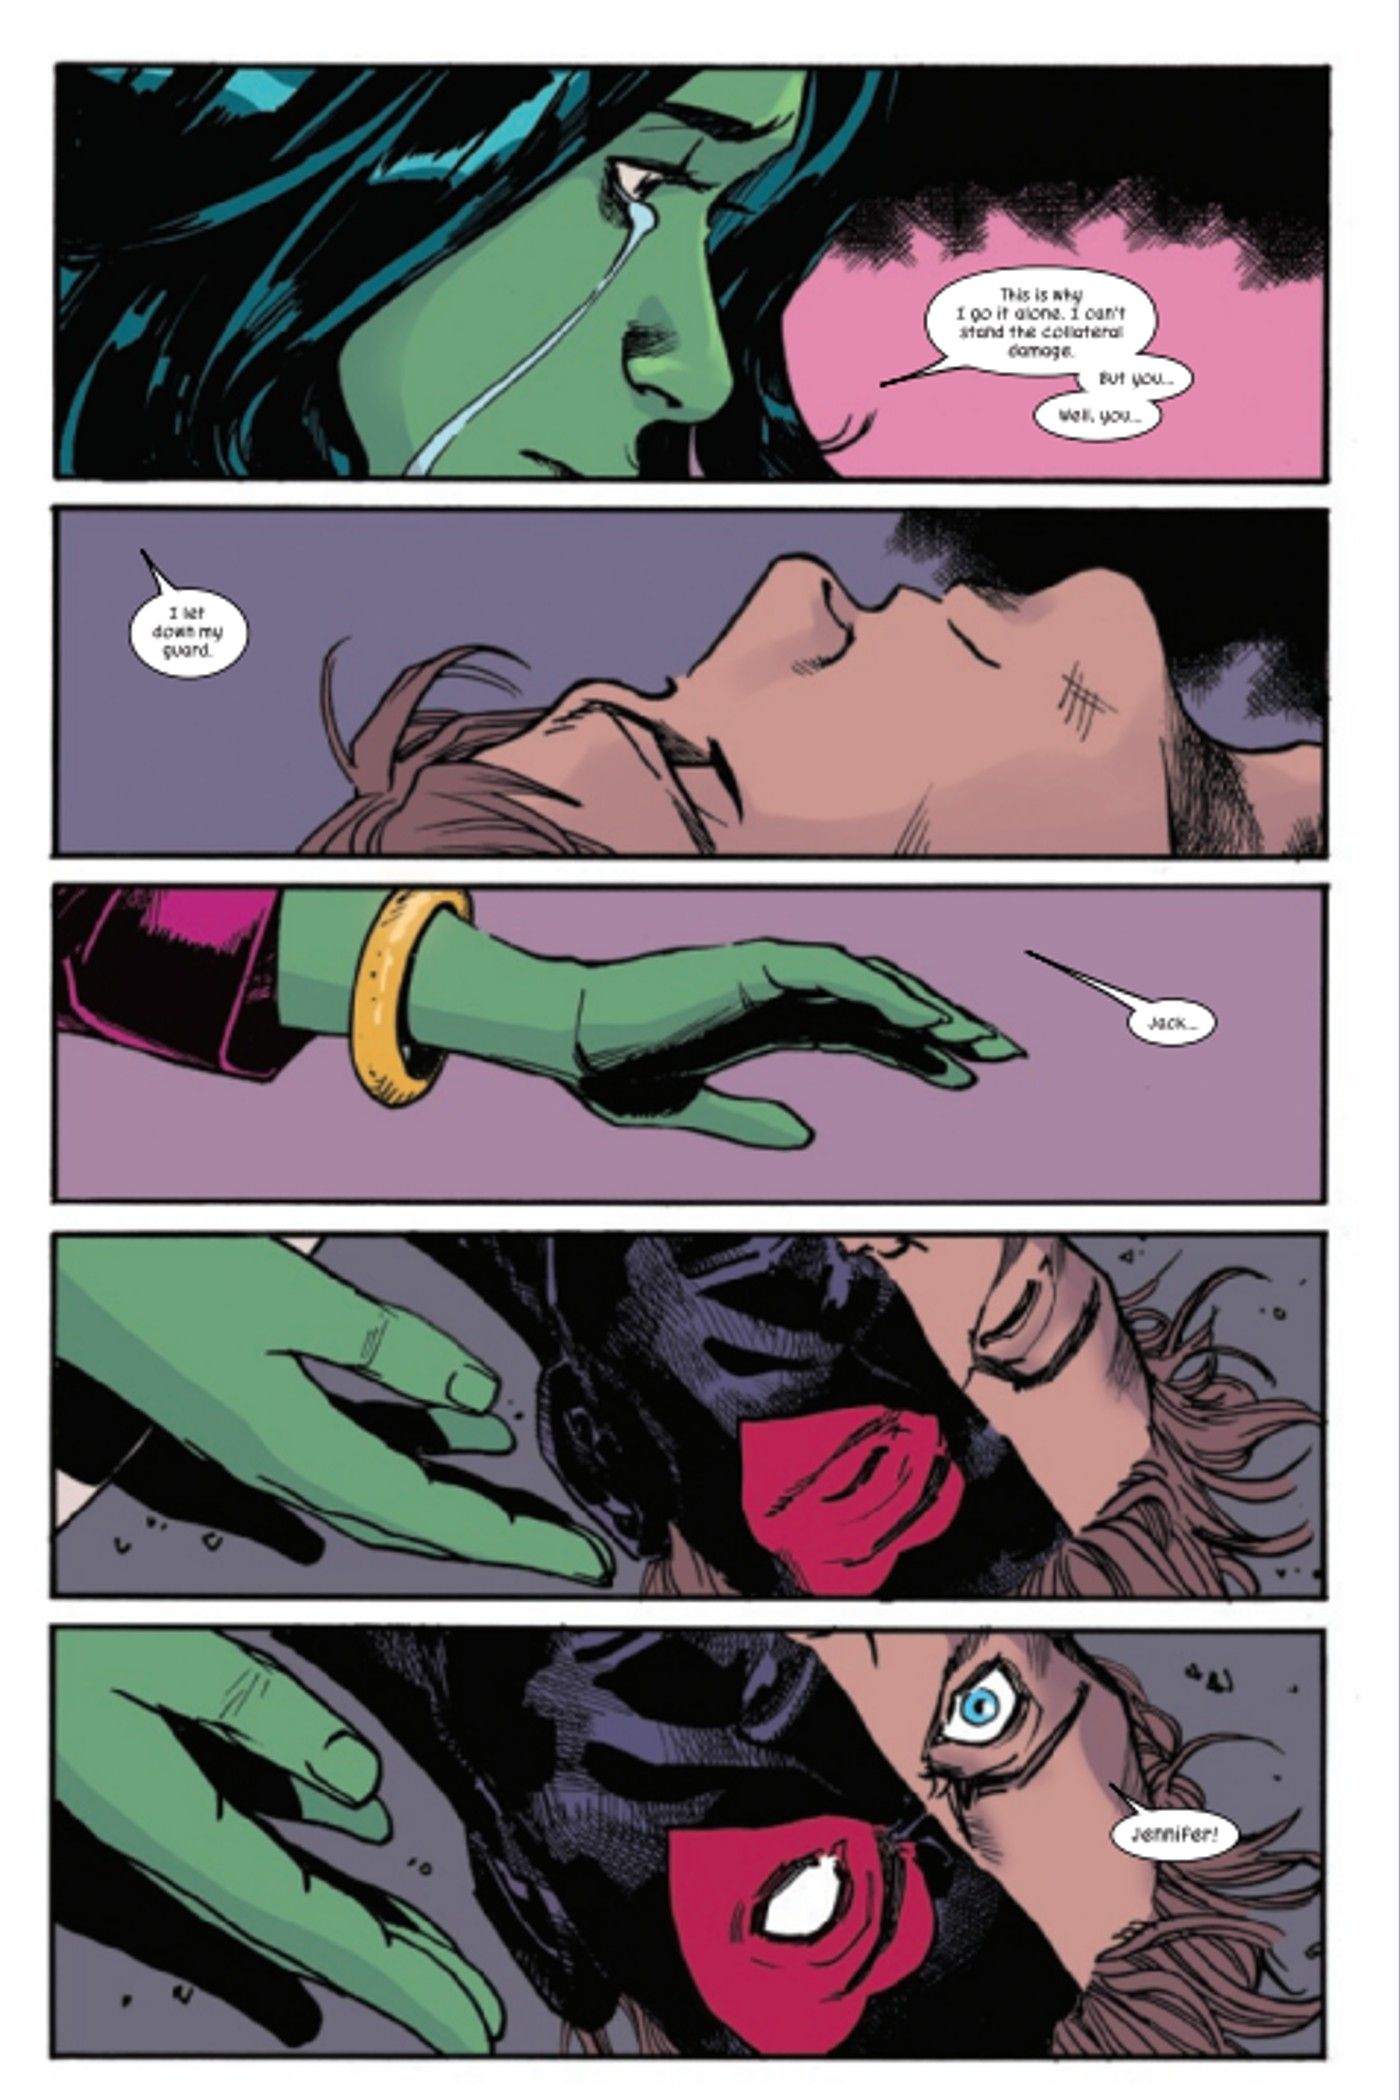 Jack of Hearts is alive with She-Hulk